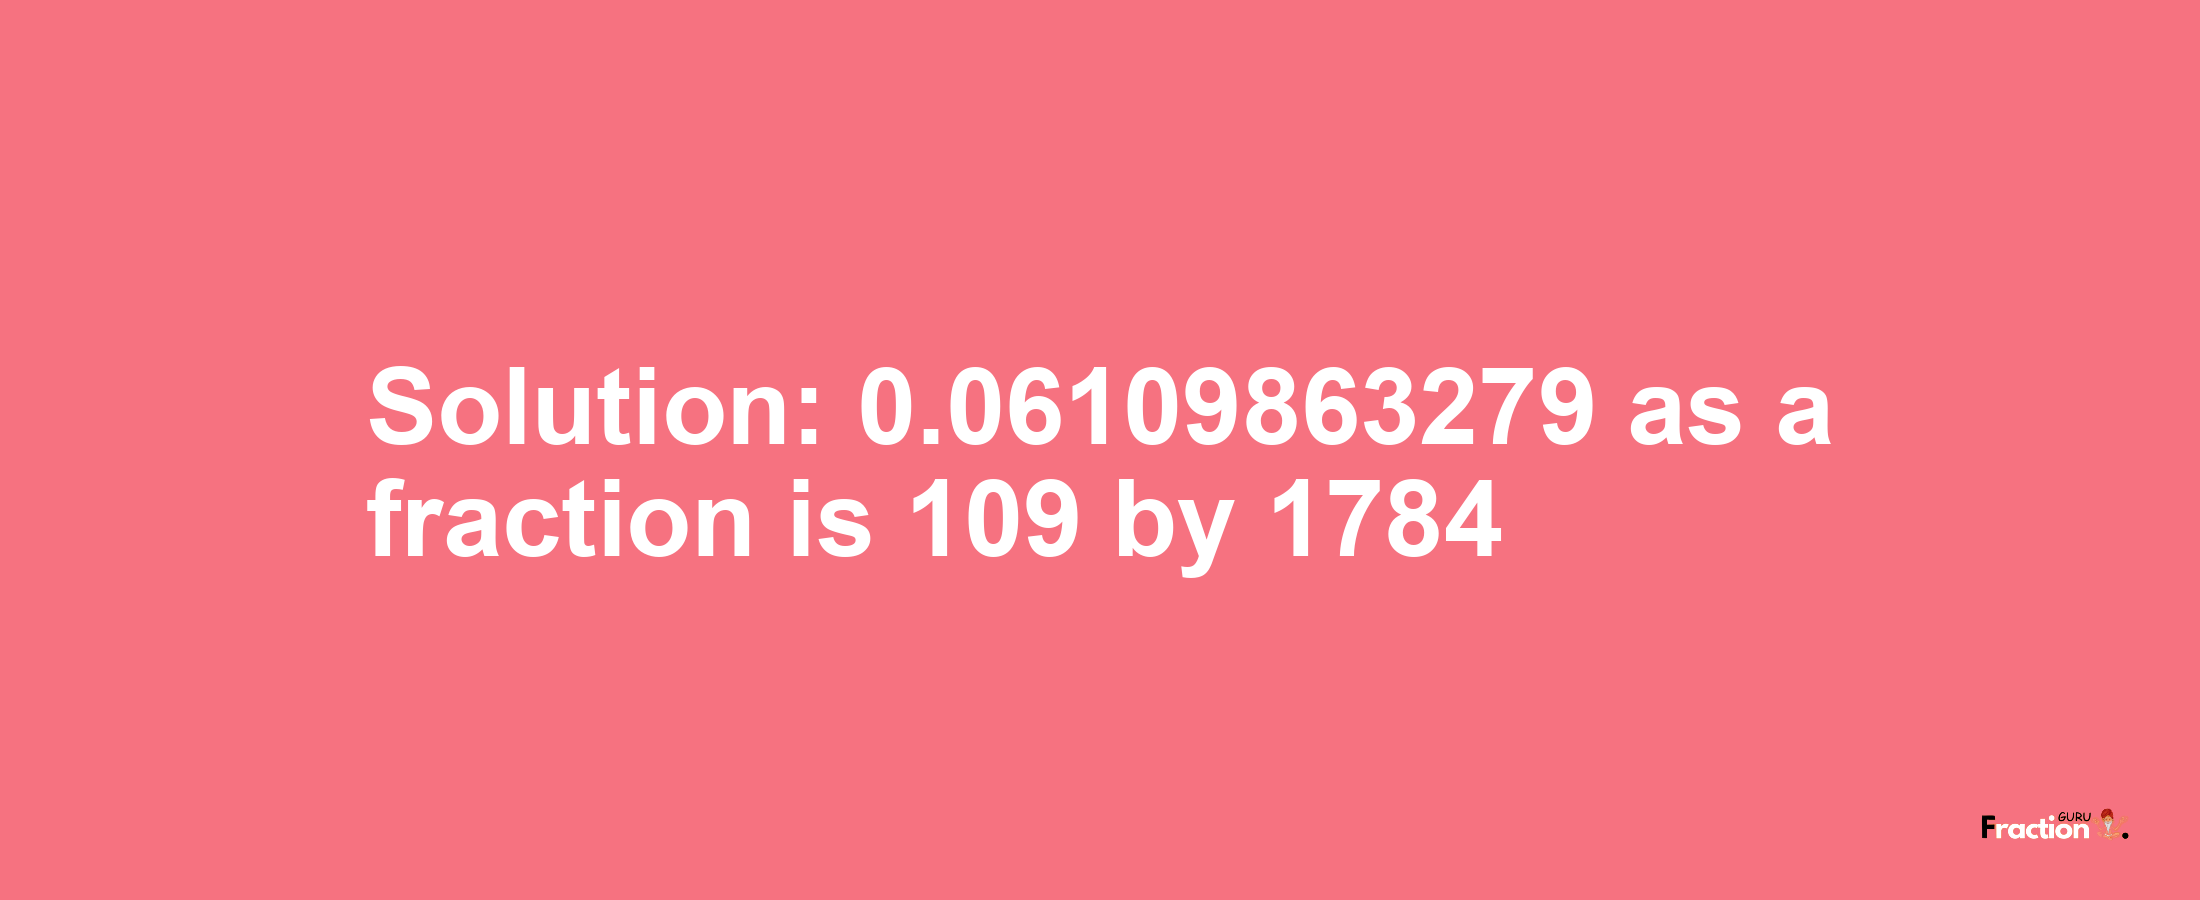 Solution:0.06109863279 as a fraction is 109/1784